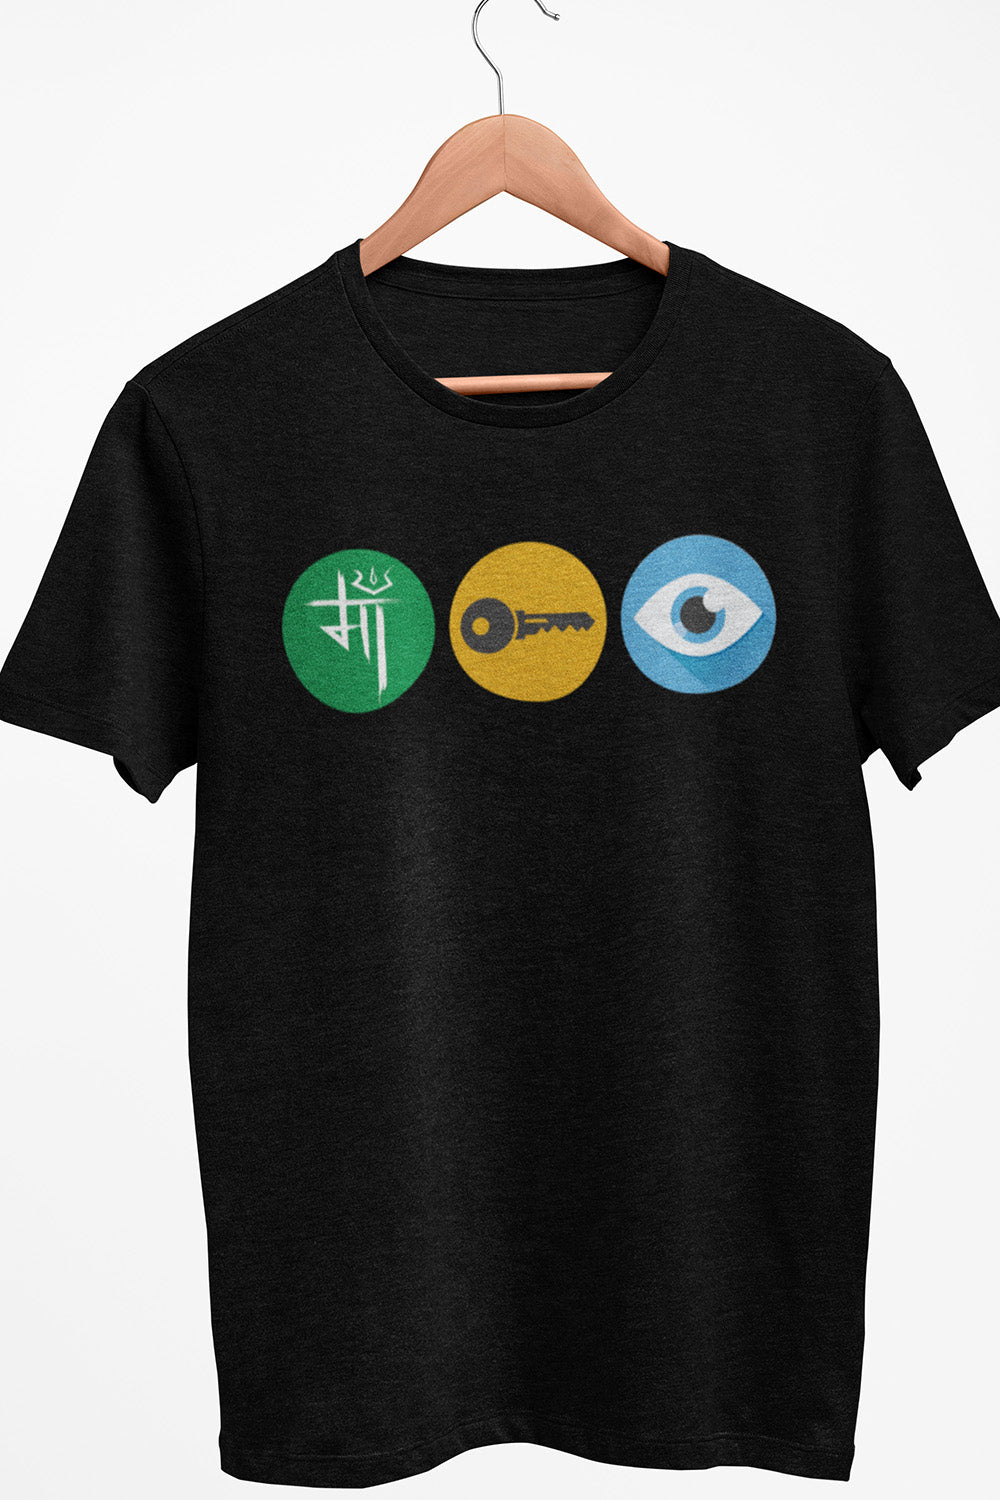 Maa Key Aankh - Quirky printed casual graphic cotton tshirt